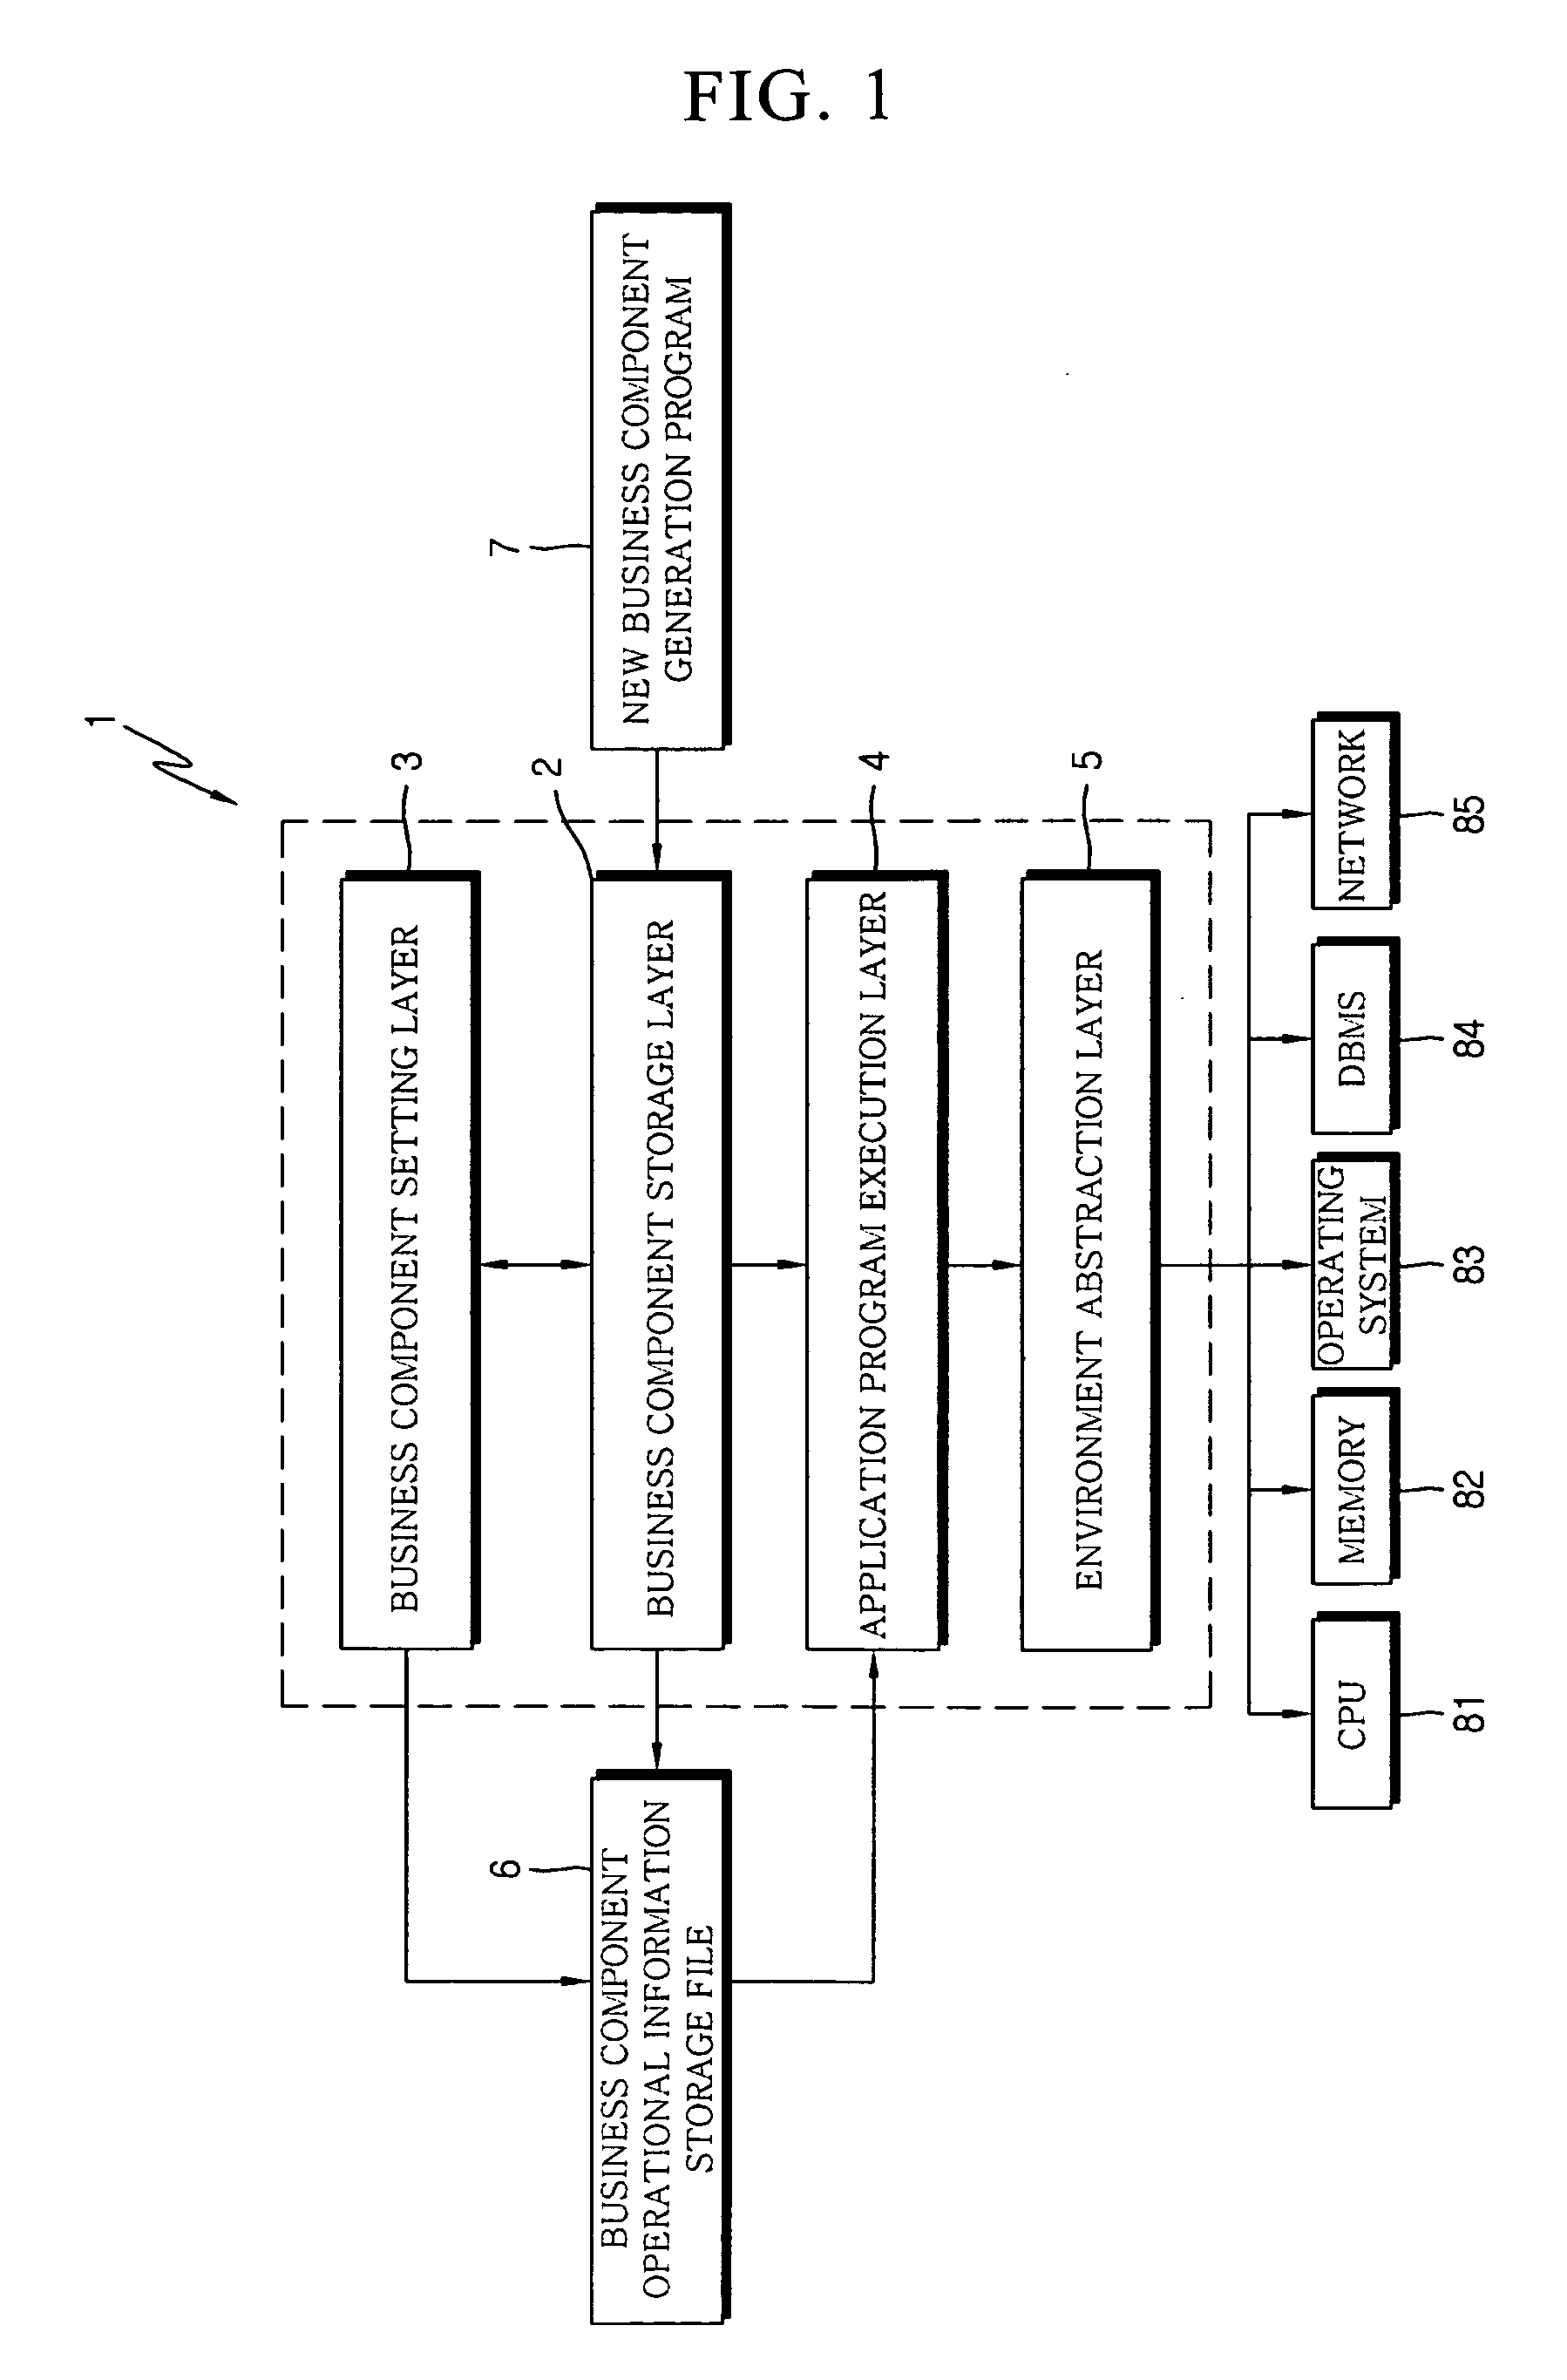 System and method for developing software based on business operating system